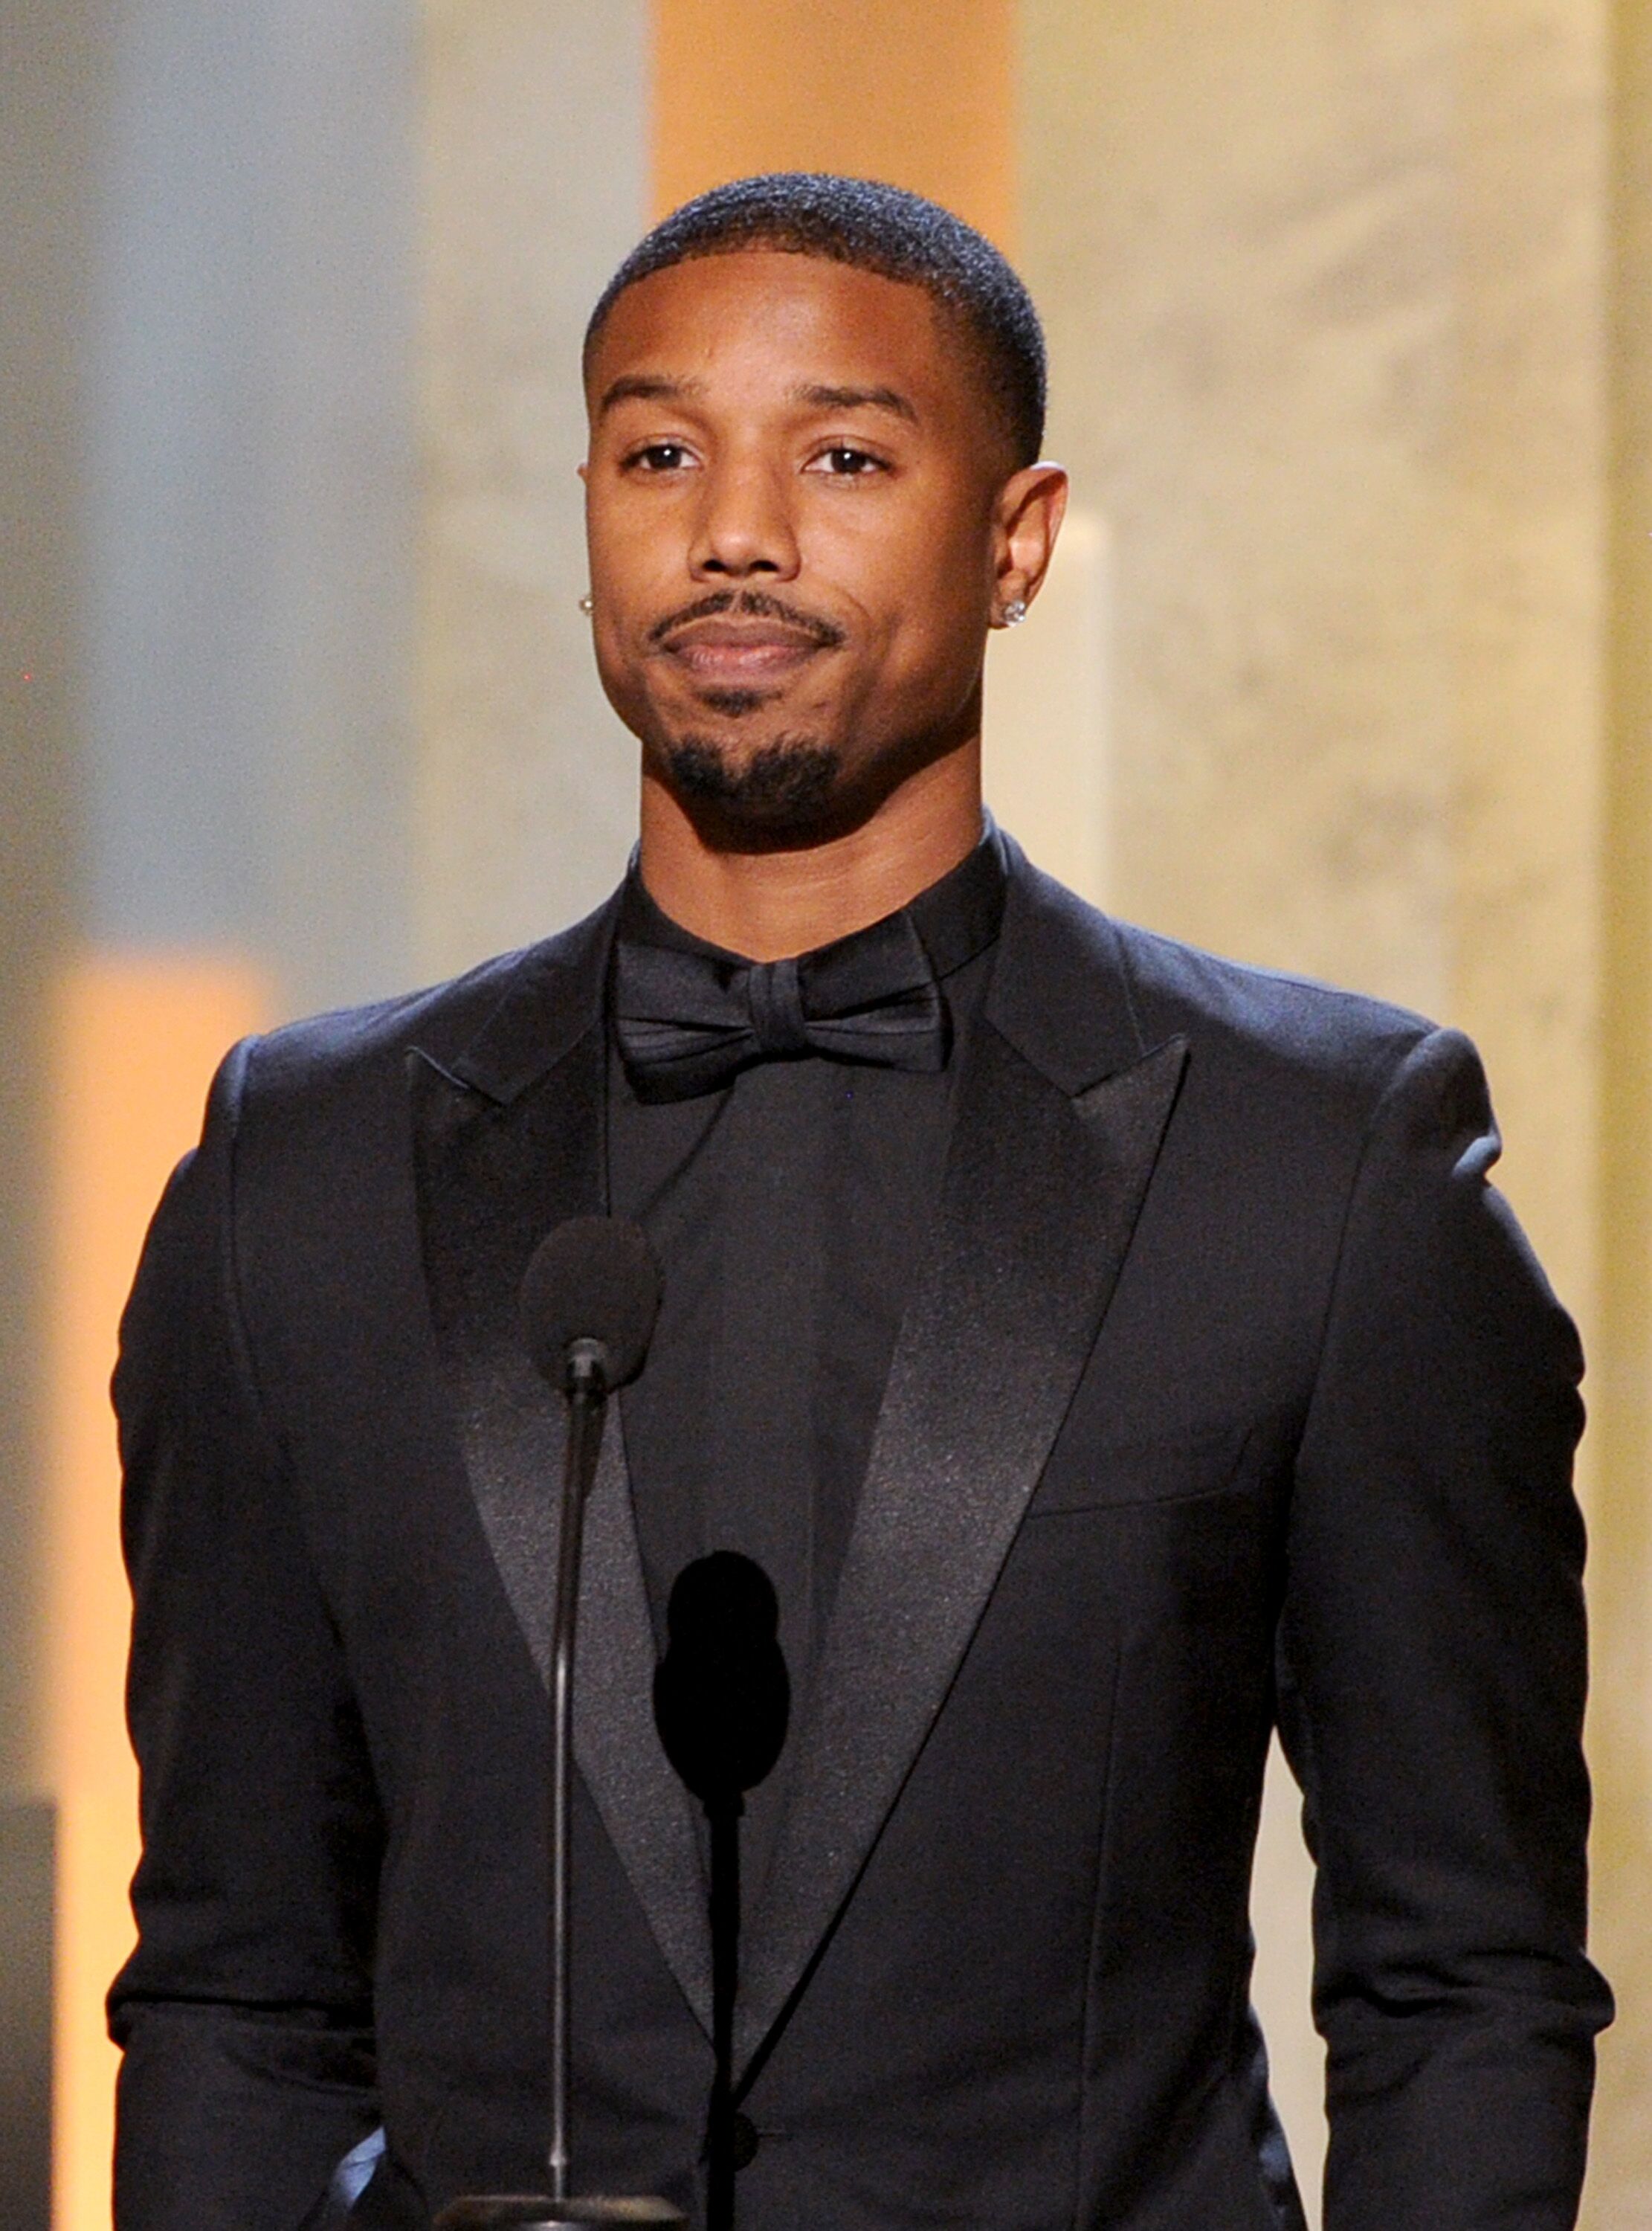 Actor Michael B. Jordan attends the photocall for "Farenheit 451" during the 71st annual Cannes Film Festival at Palais des Festivals | Photo: Getty Images